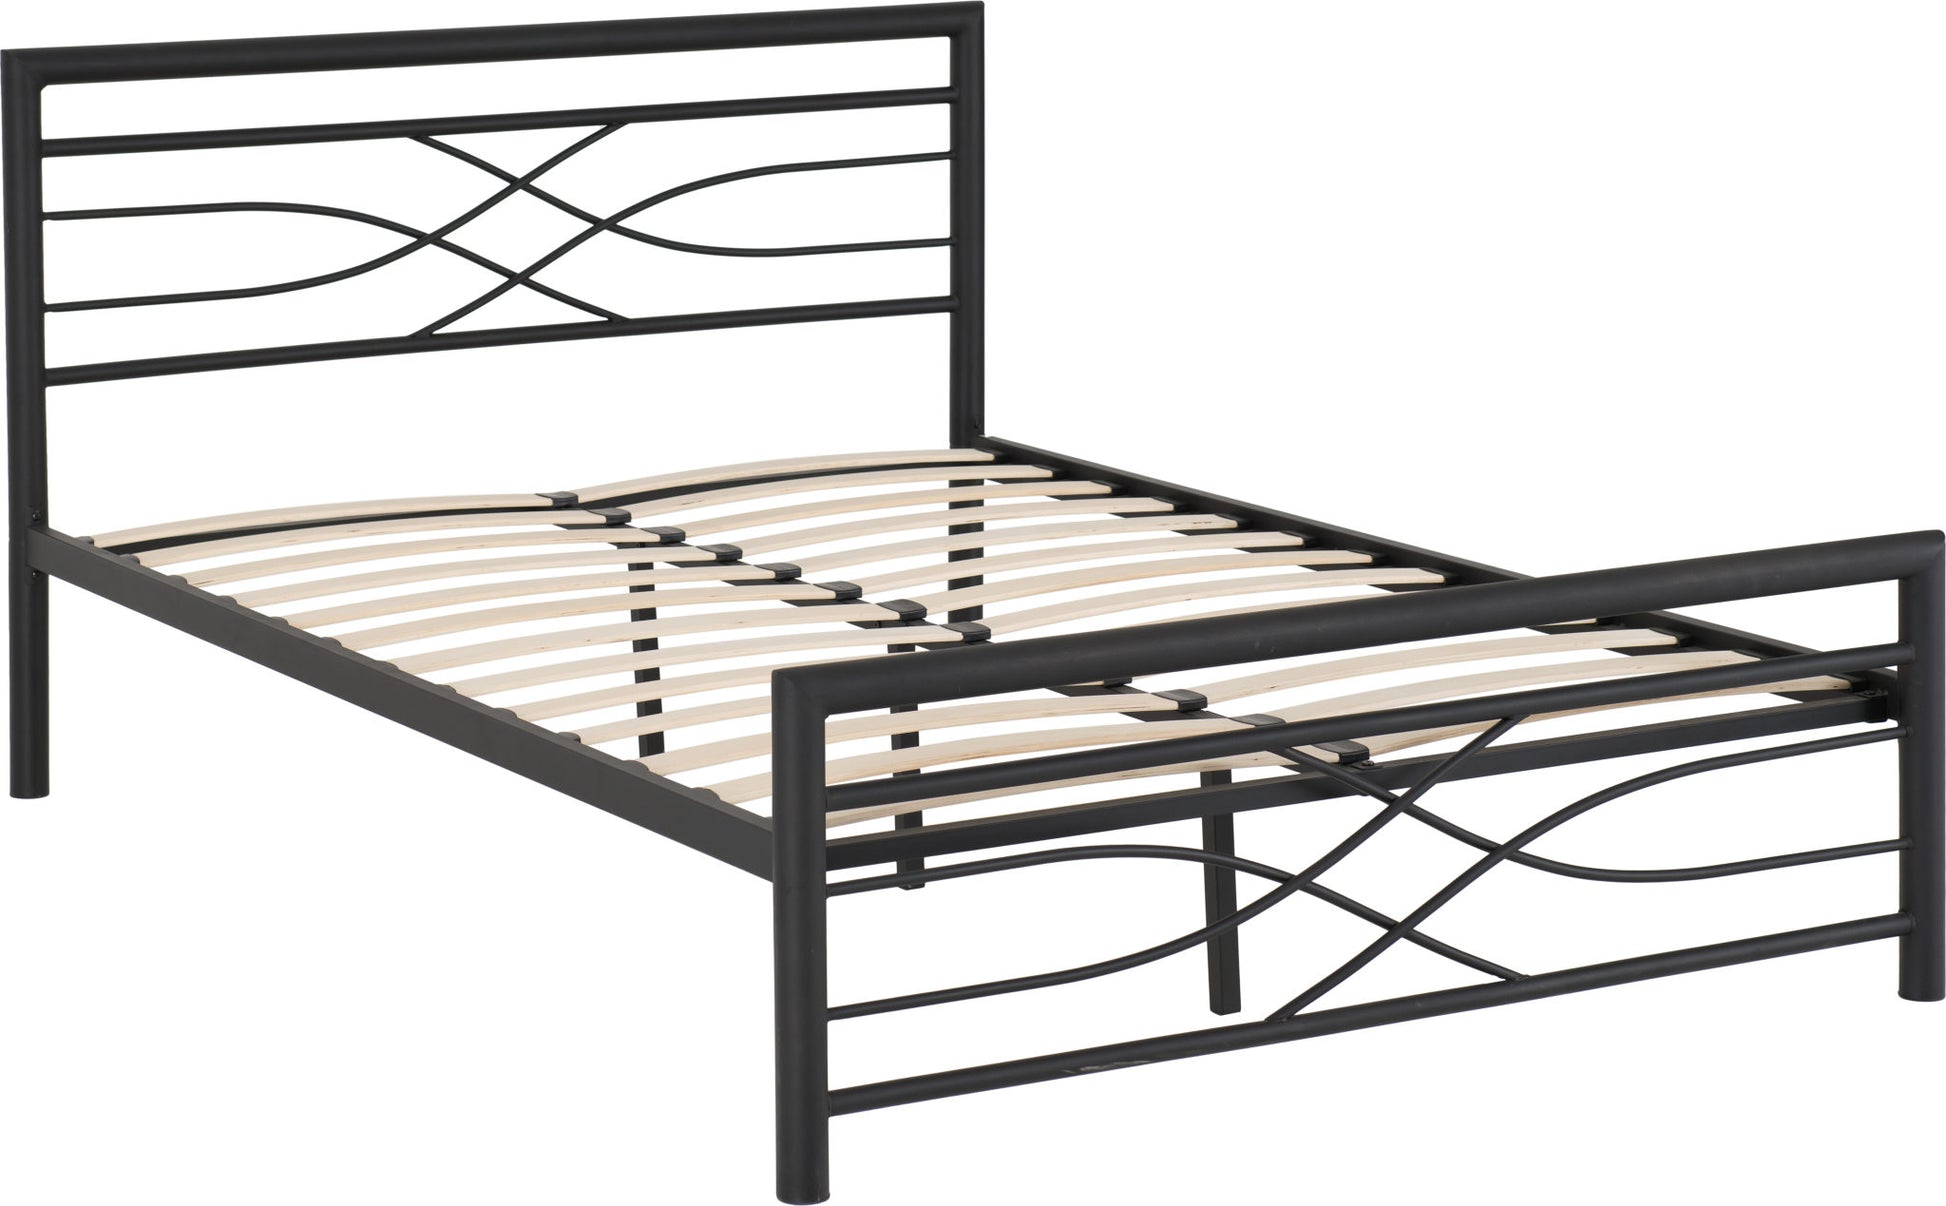 Kelly 4'6" Double Bed - Black